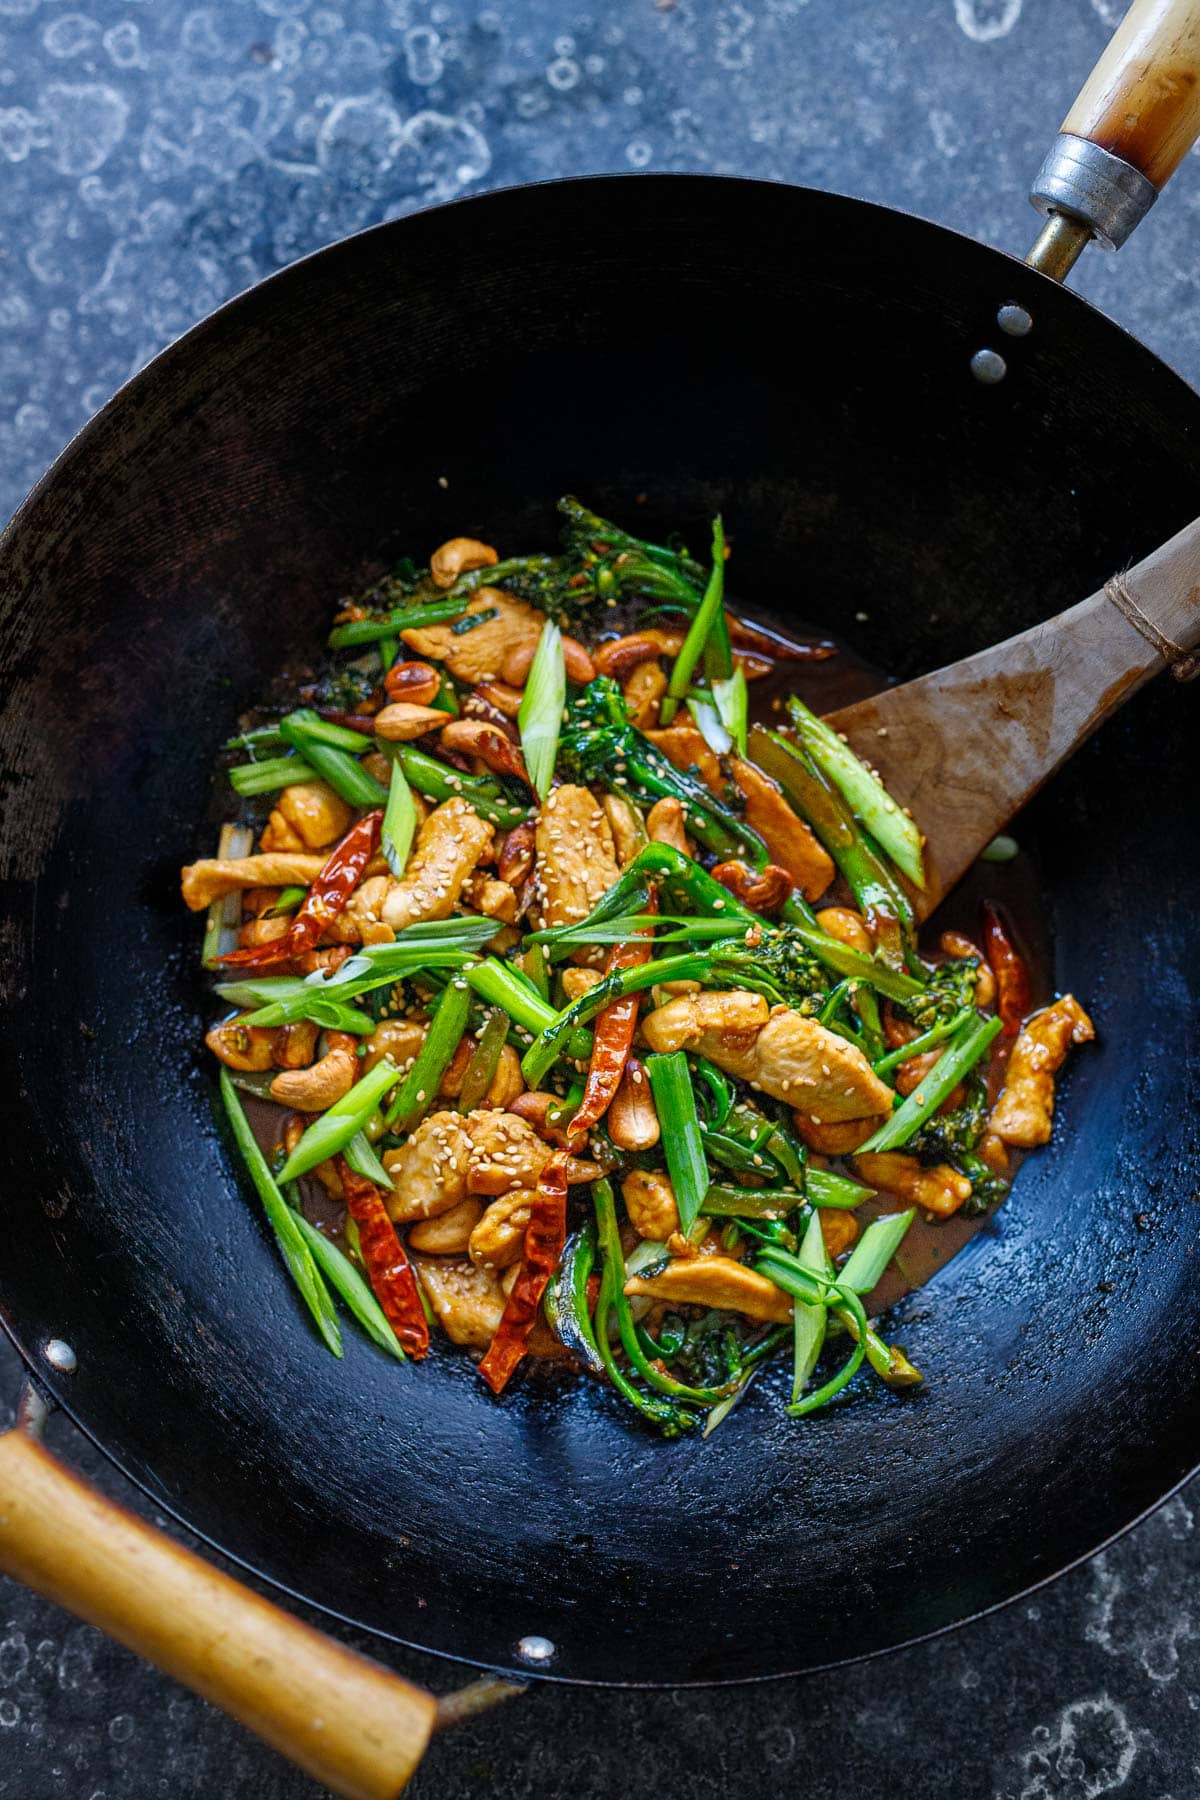 szechuan chicken stir fry in wok with broccolini, green onions, toasted cashews, sesame seeds, chilies